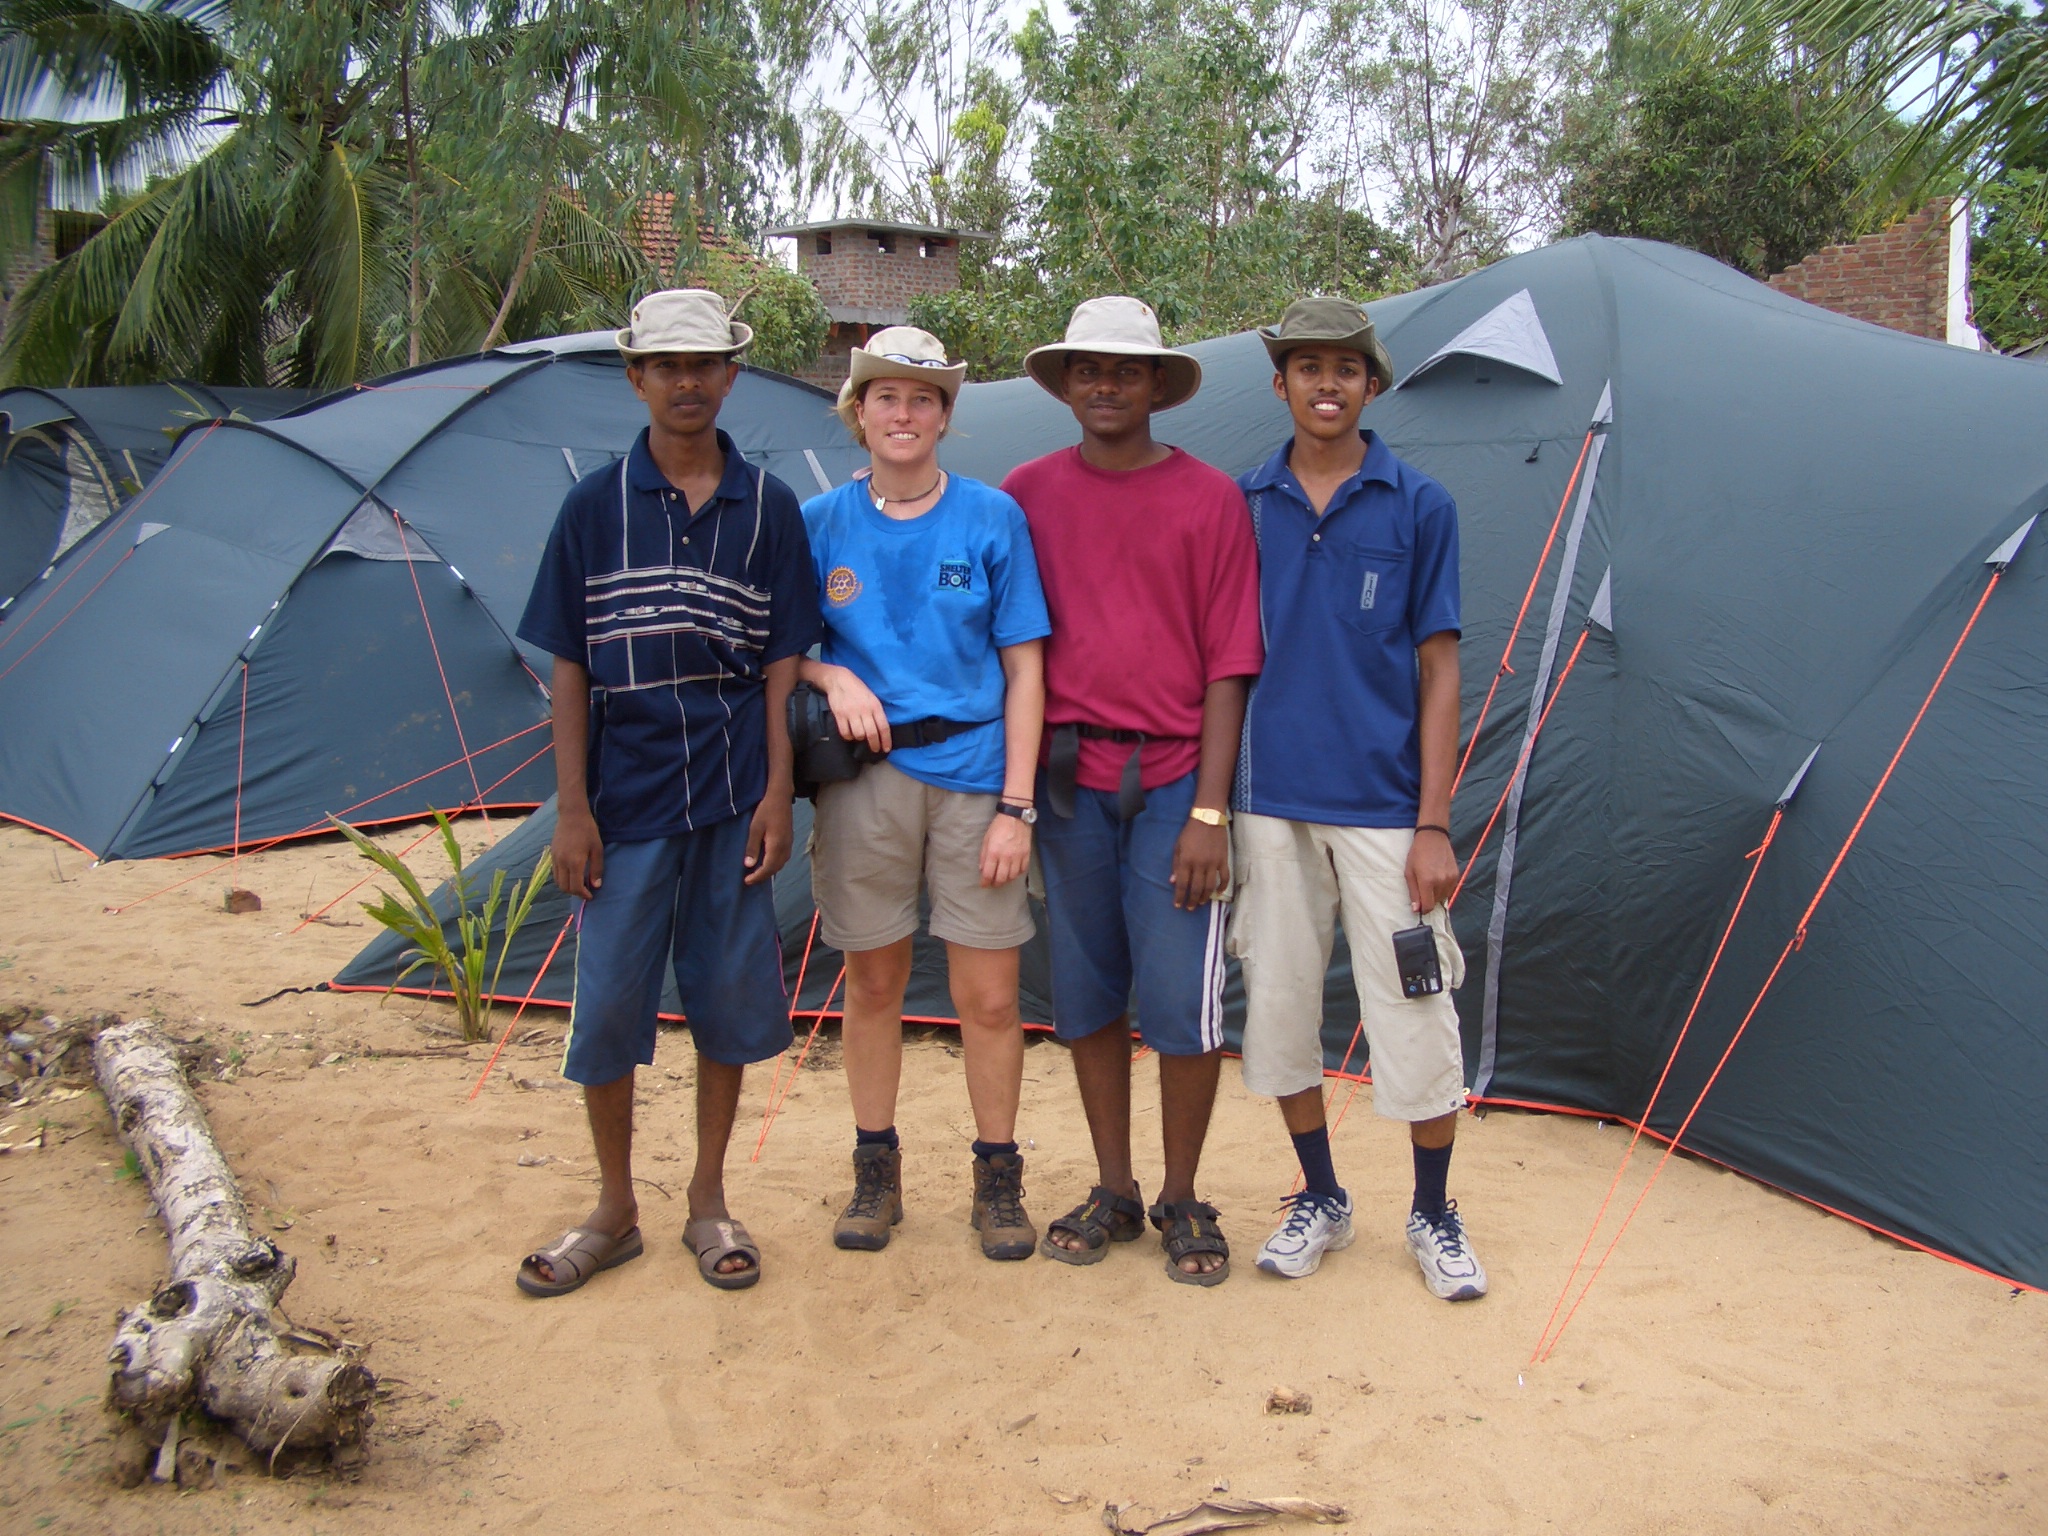 A group of 4 people posing in front of tents in Sri Lanka, following the Boxing Day Tsunami of 2004